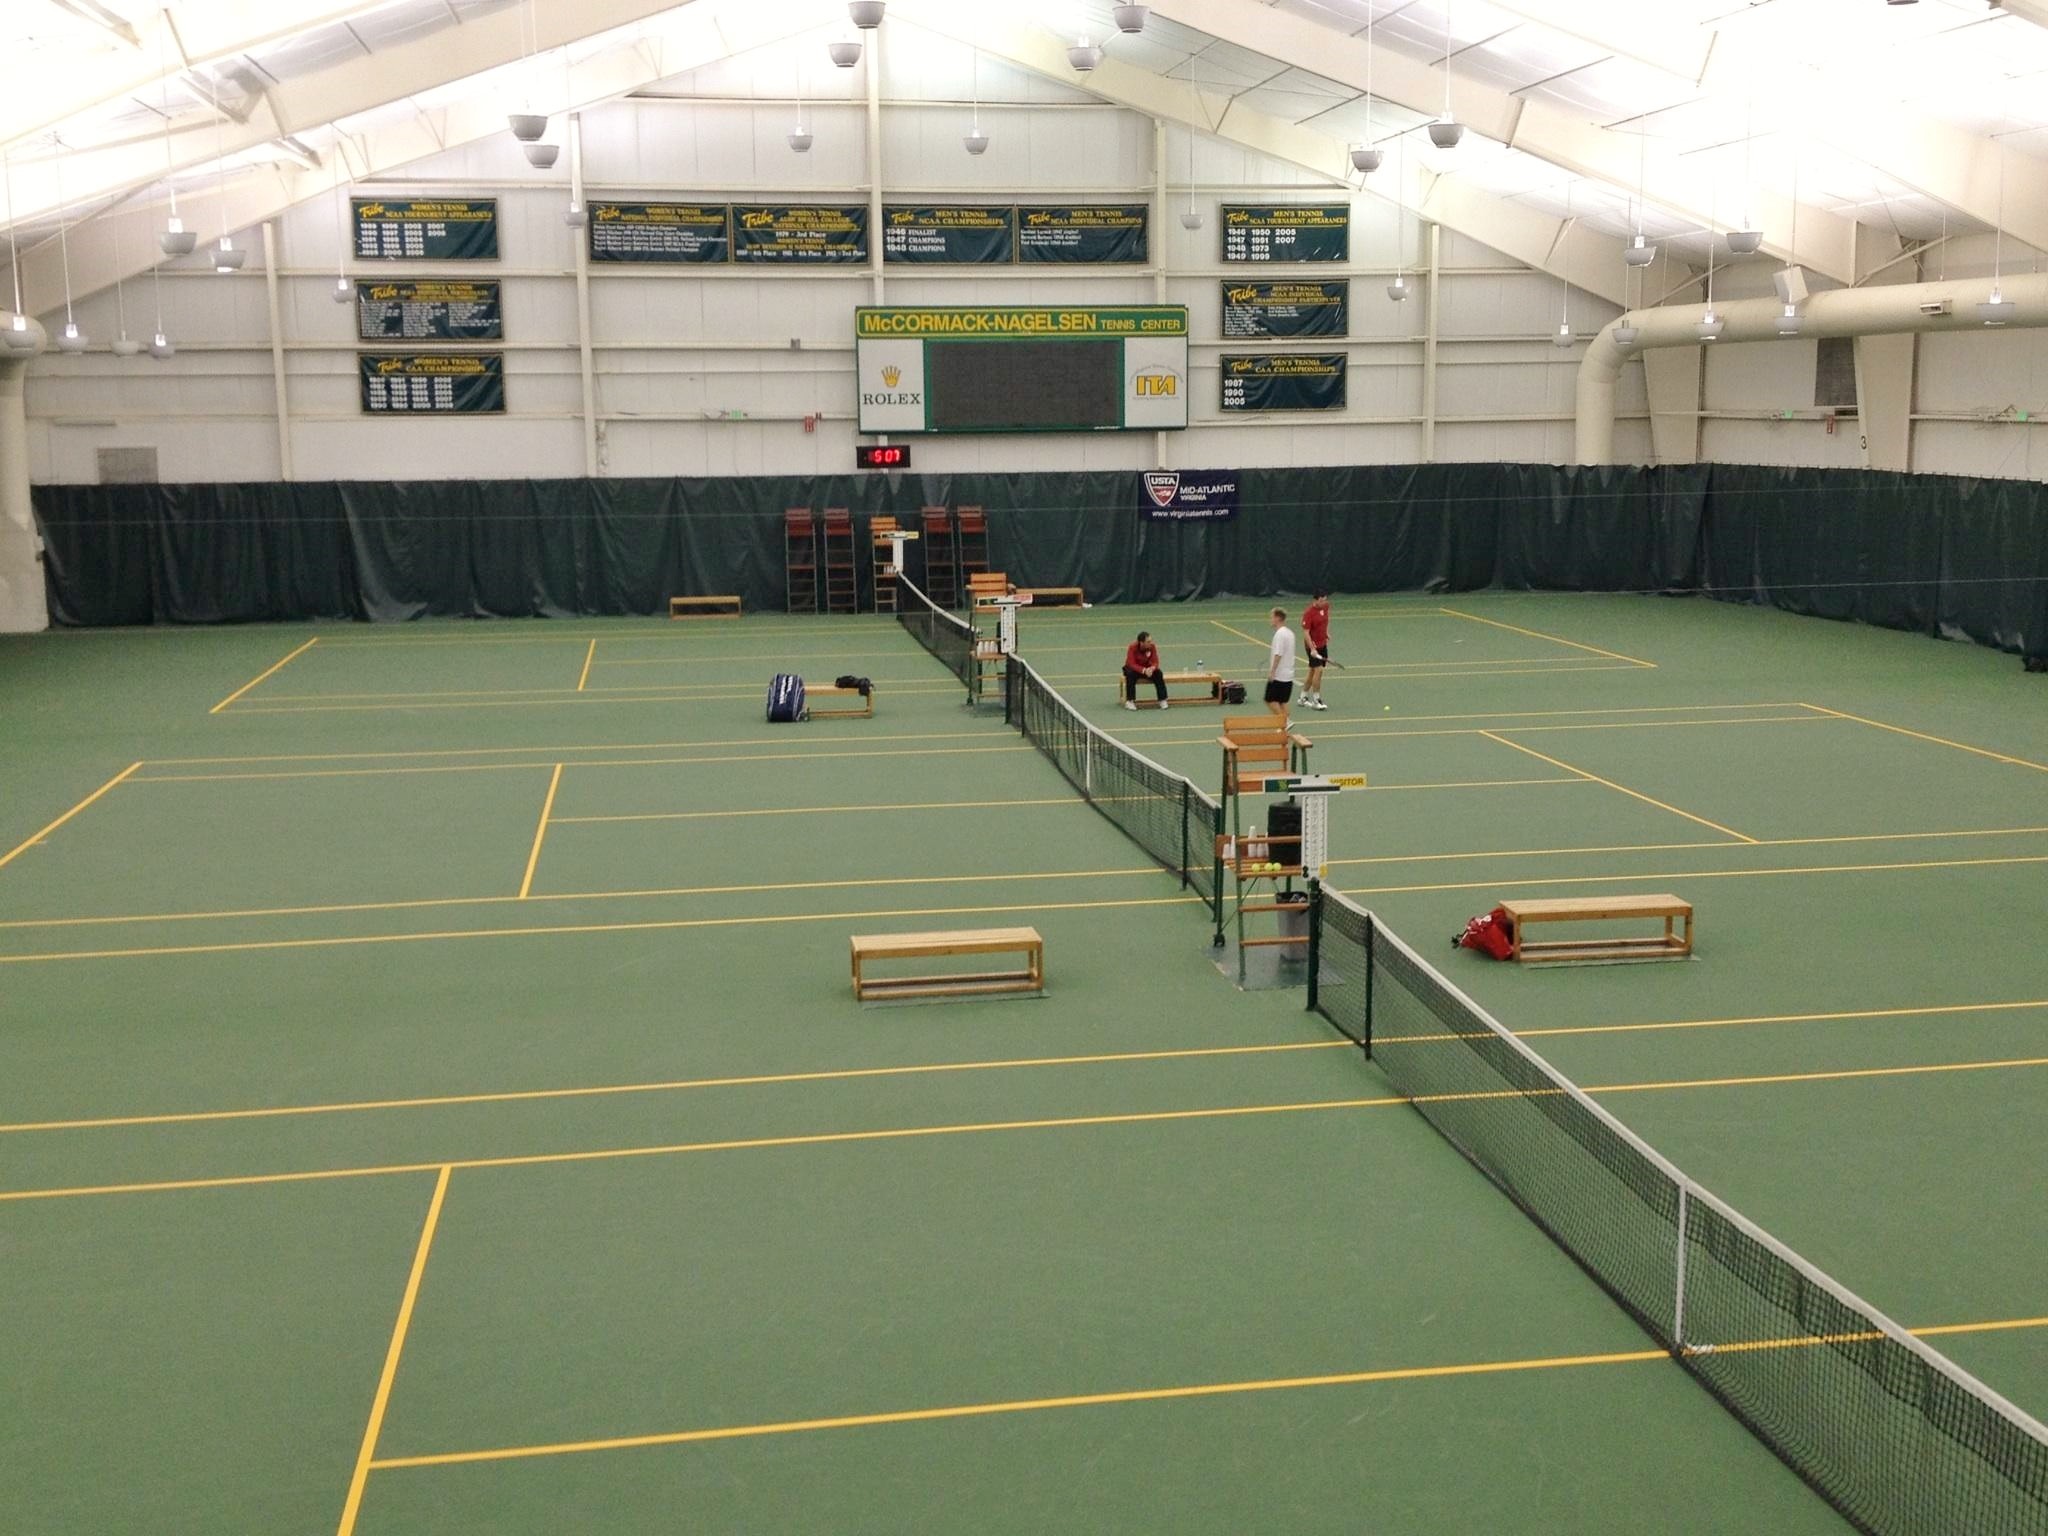 2048x1536 The William and Mary McCormack-Nagelsen Tennis Center